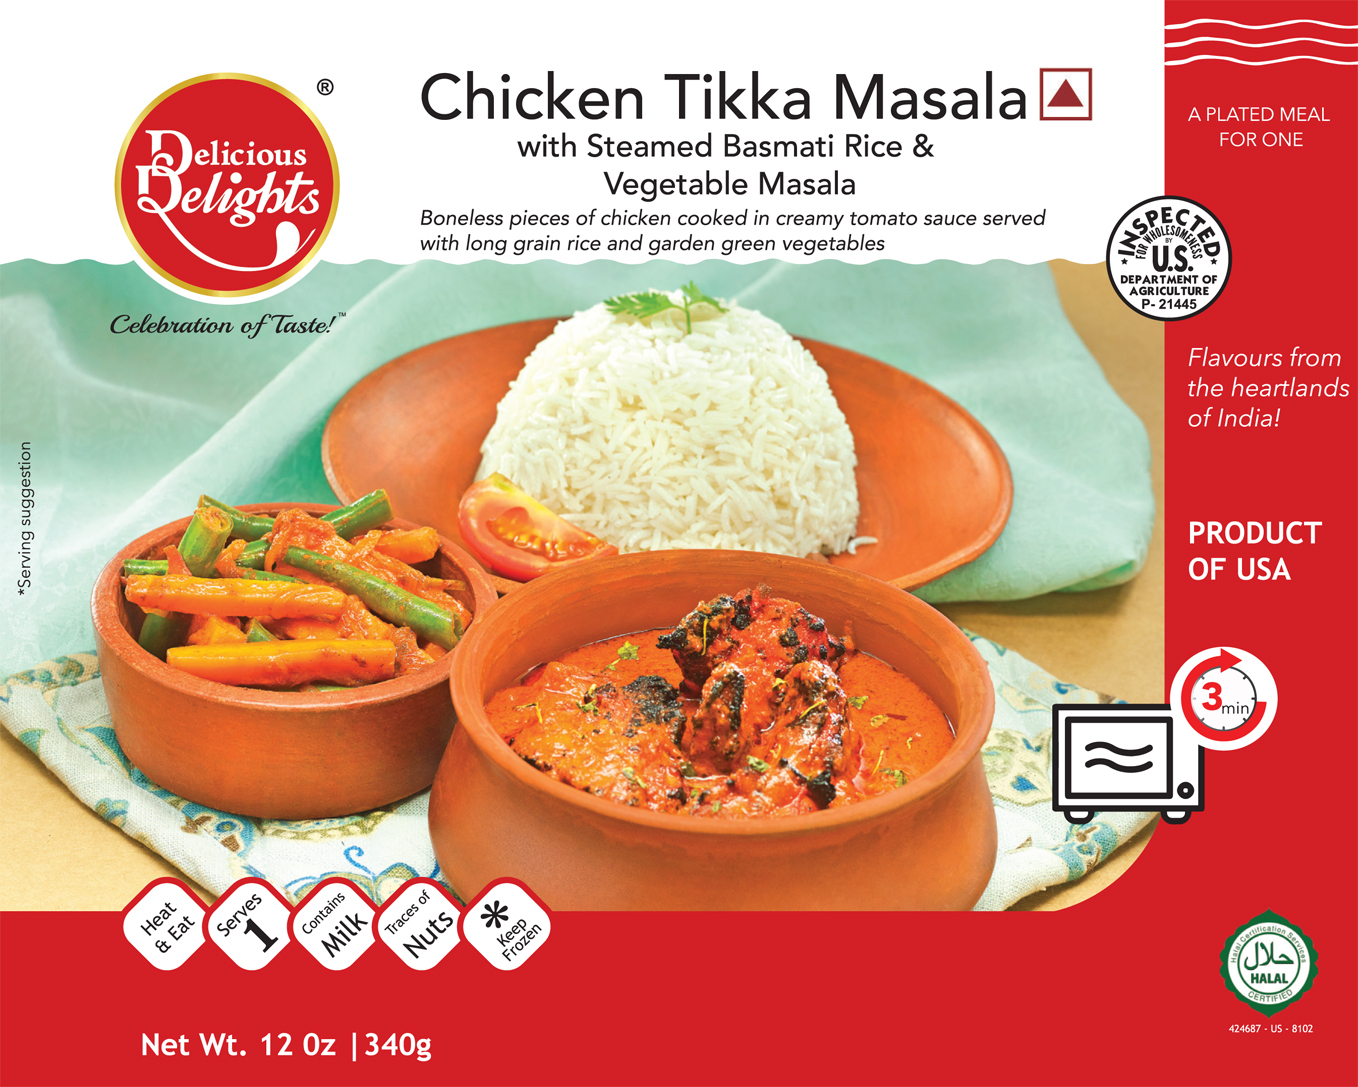 Delicious Delights Chicken Tikka Masala with Steamed Basmati Rice and Vegetable Masala